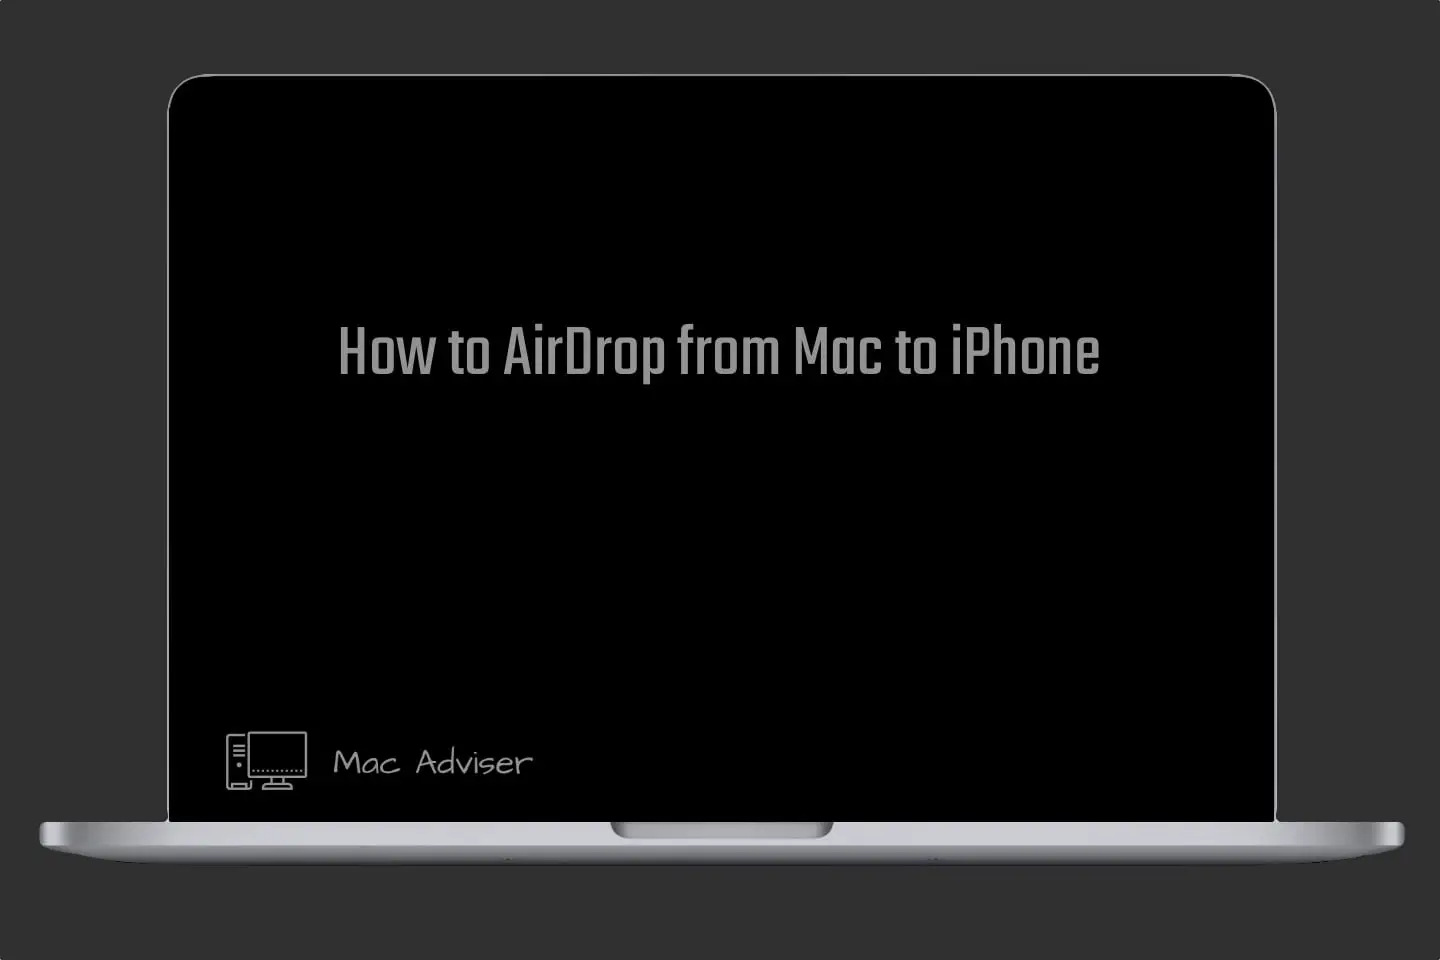 How to Airdrop from Mac to iPhone